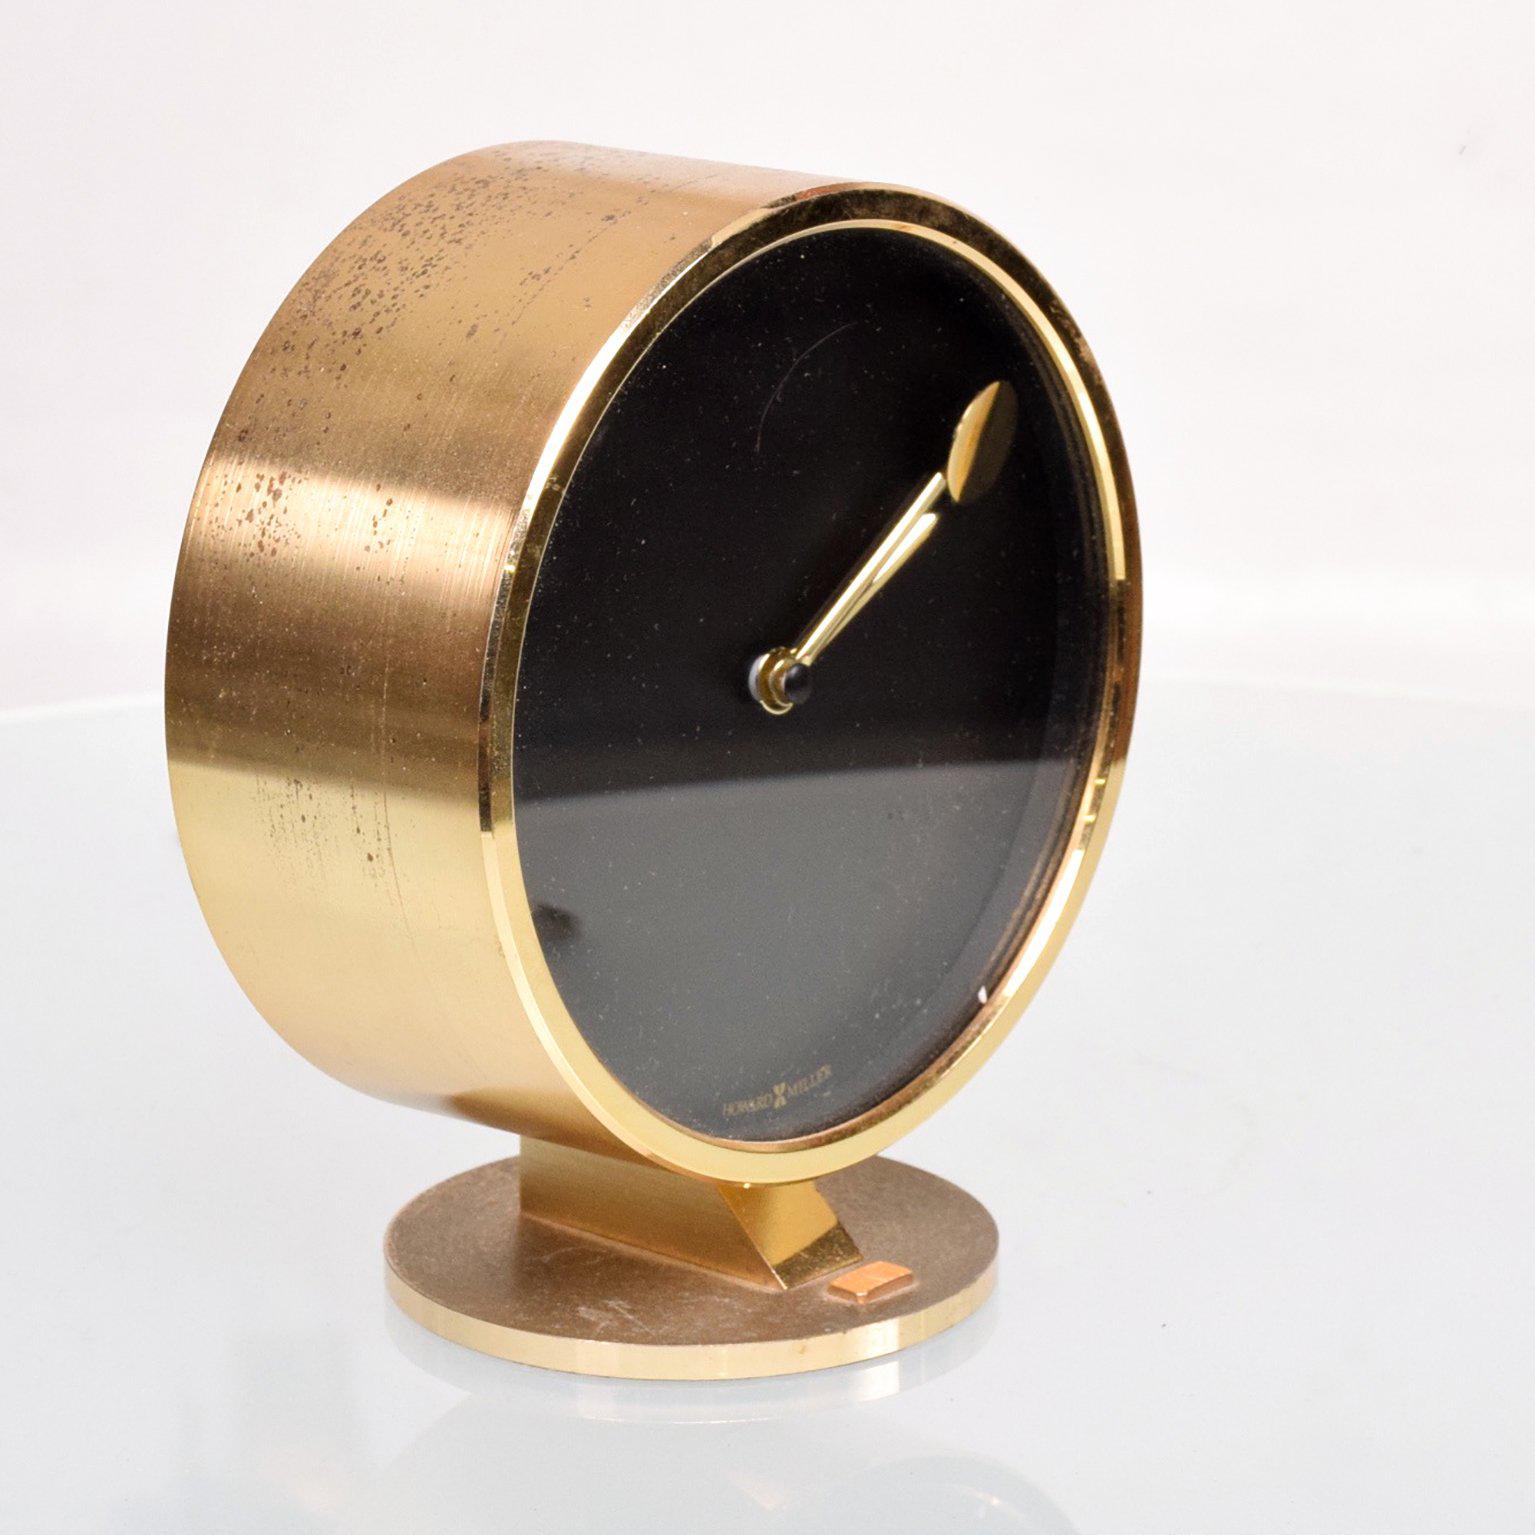 Chinese Howard Miller Brass Table Clock